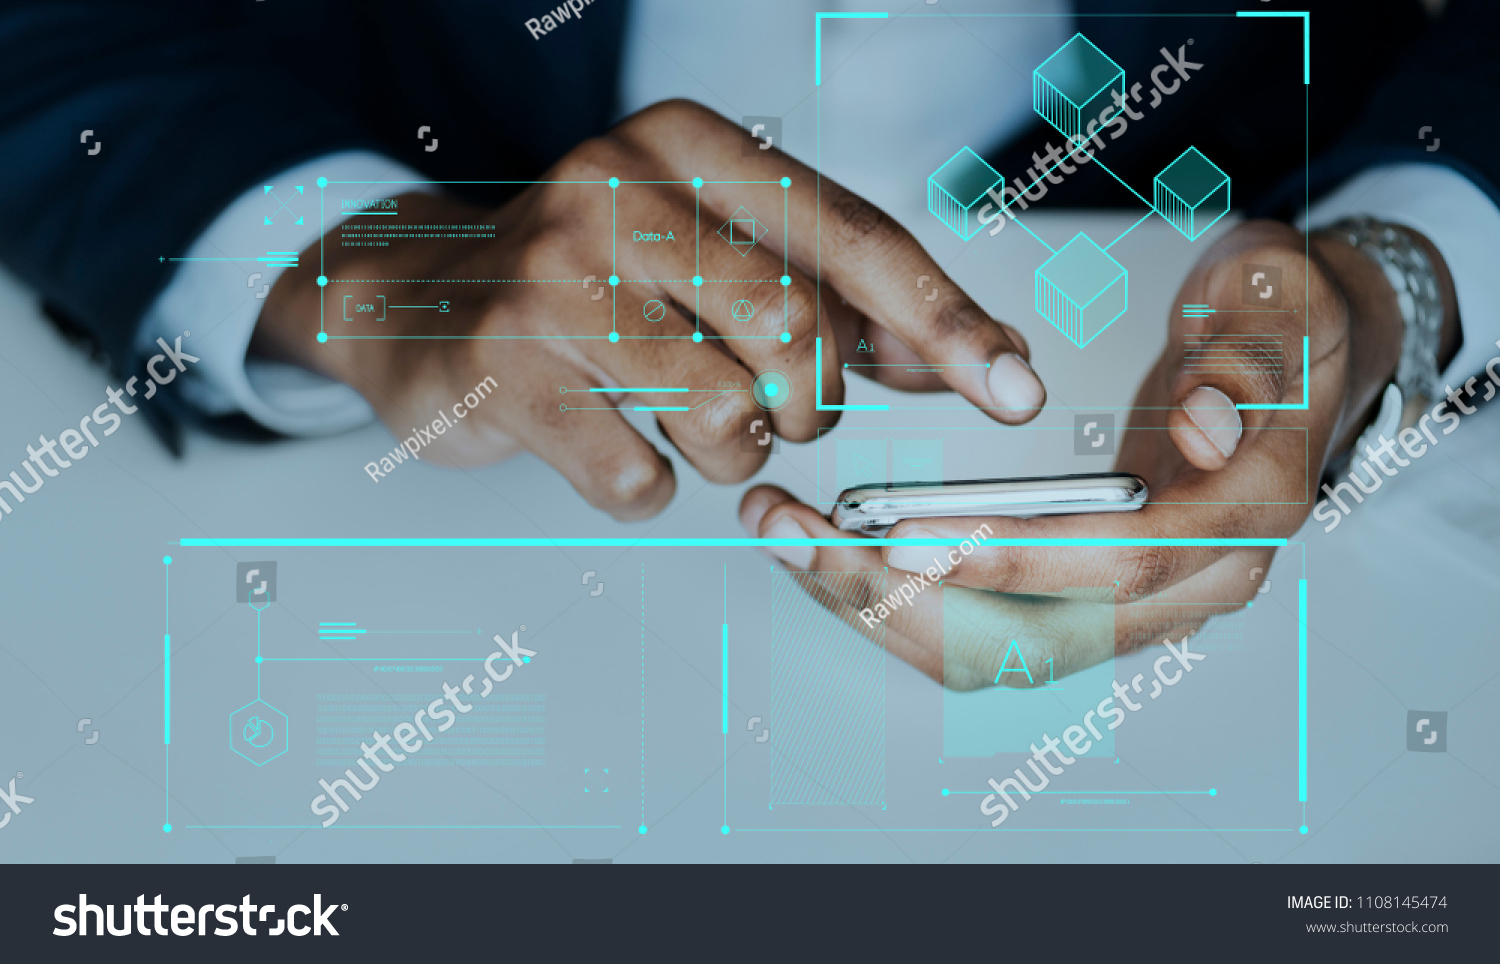 Man typing on a smartphone #1108145474